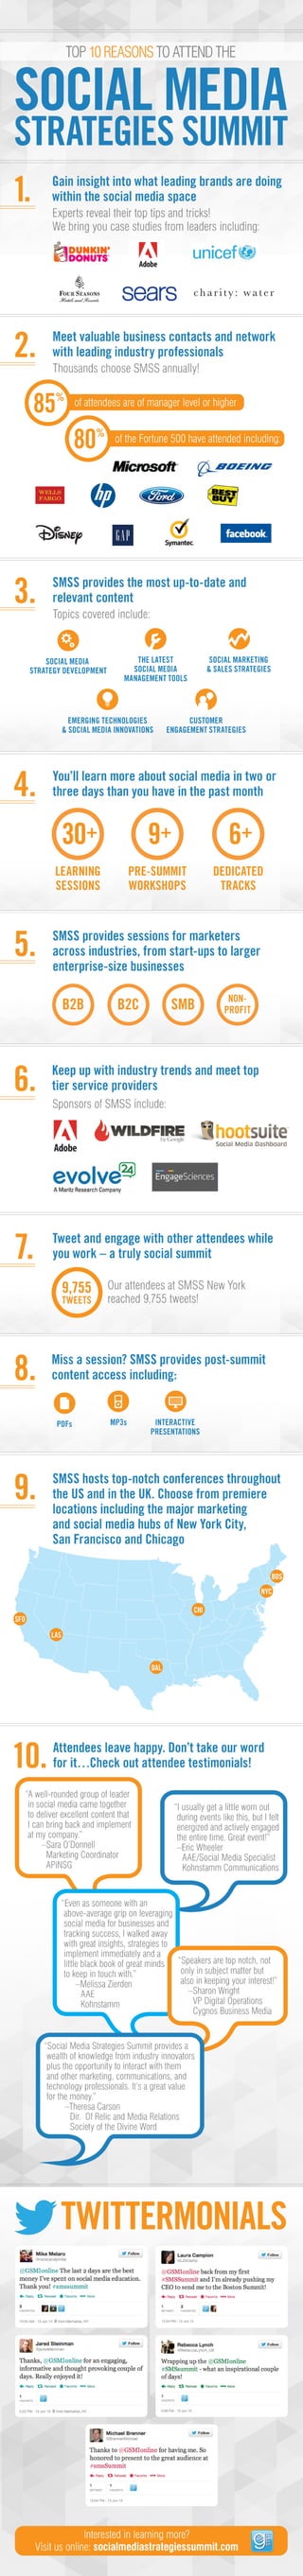 Top 10 Reasons to Attend #SMSS